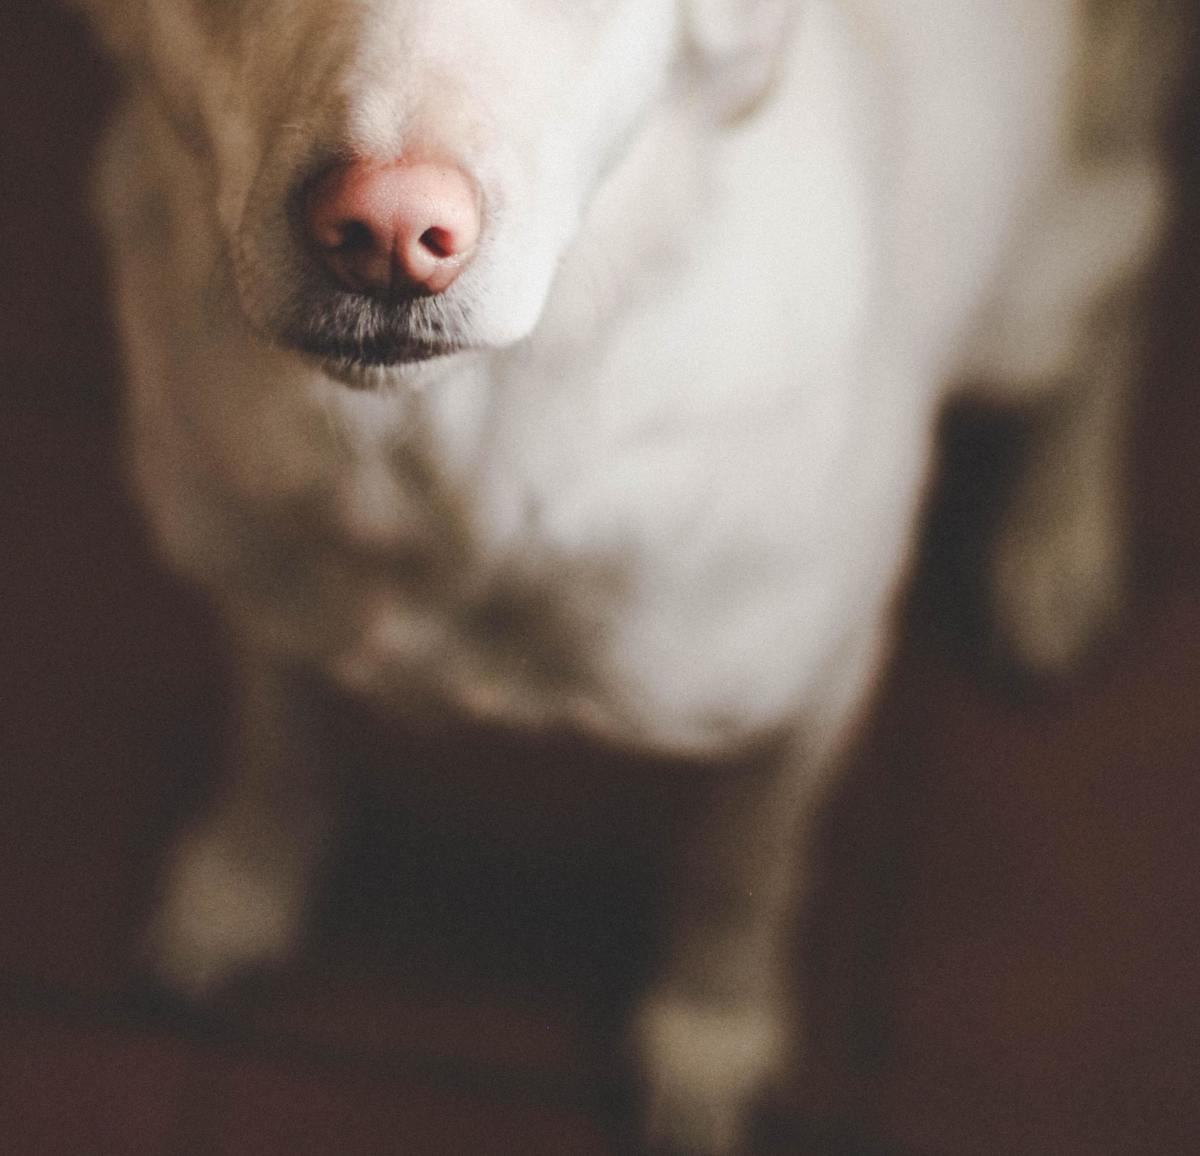 Why Is My Dog'S Nose Turning Pink? - Pethelpful